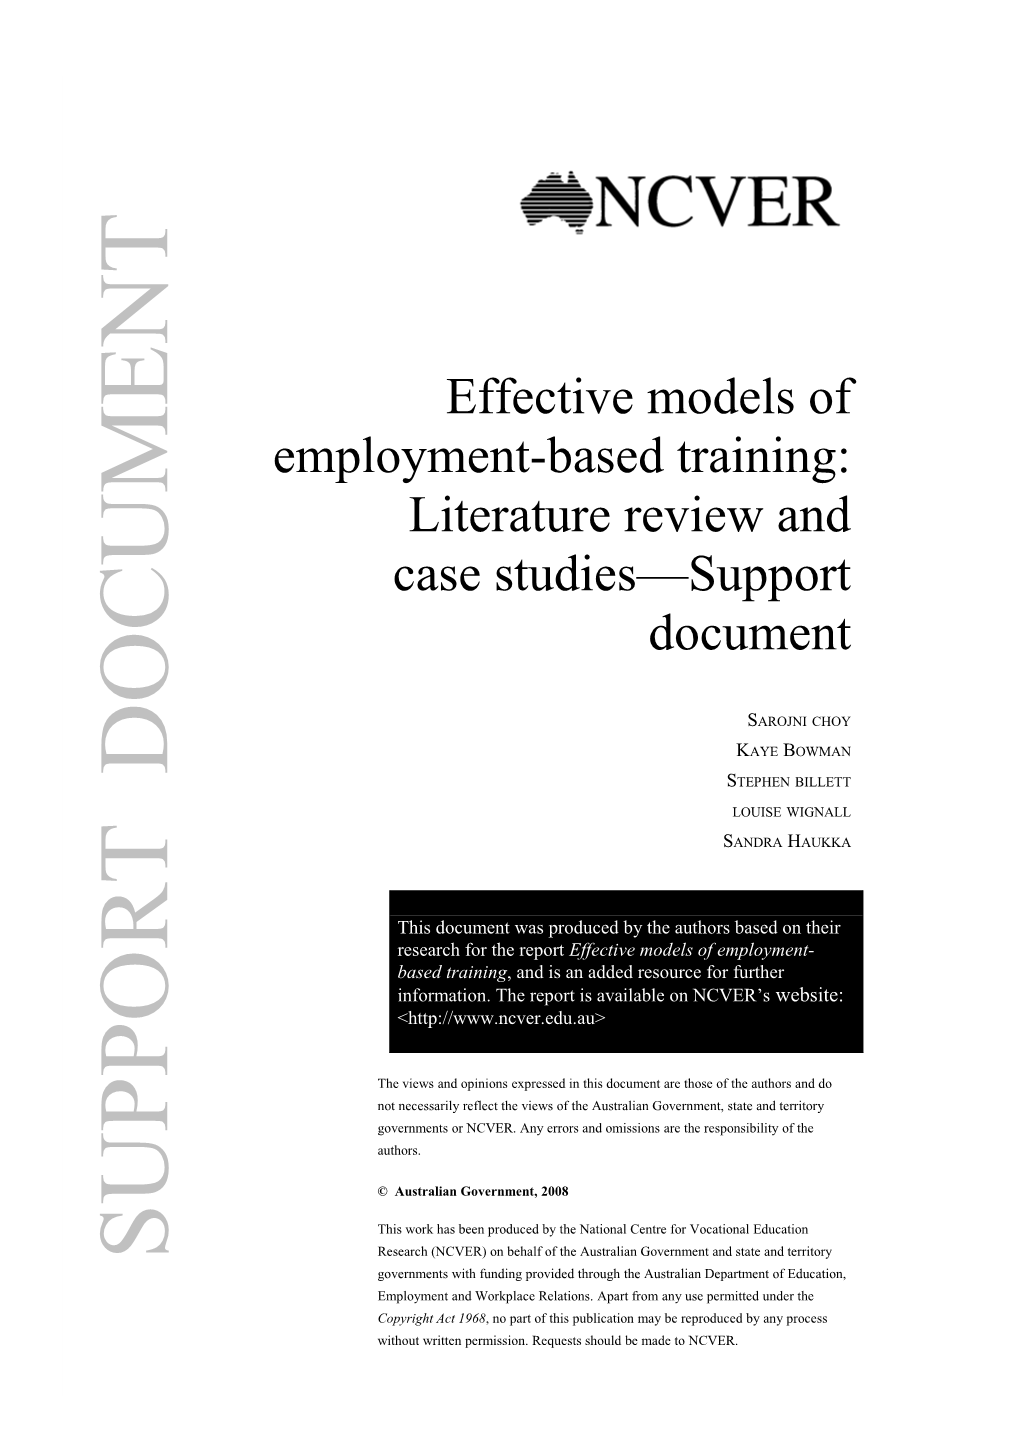 Effective Models of Employment-Based Training: Literature Review And